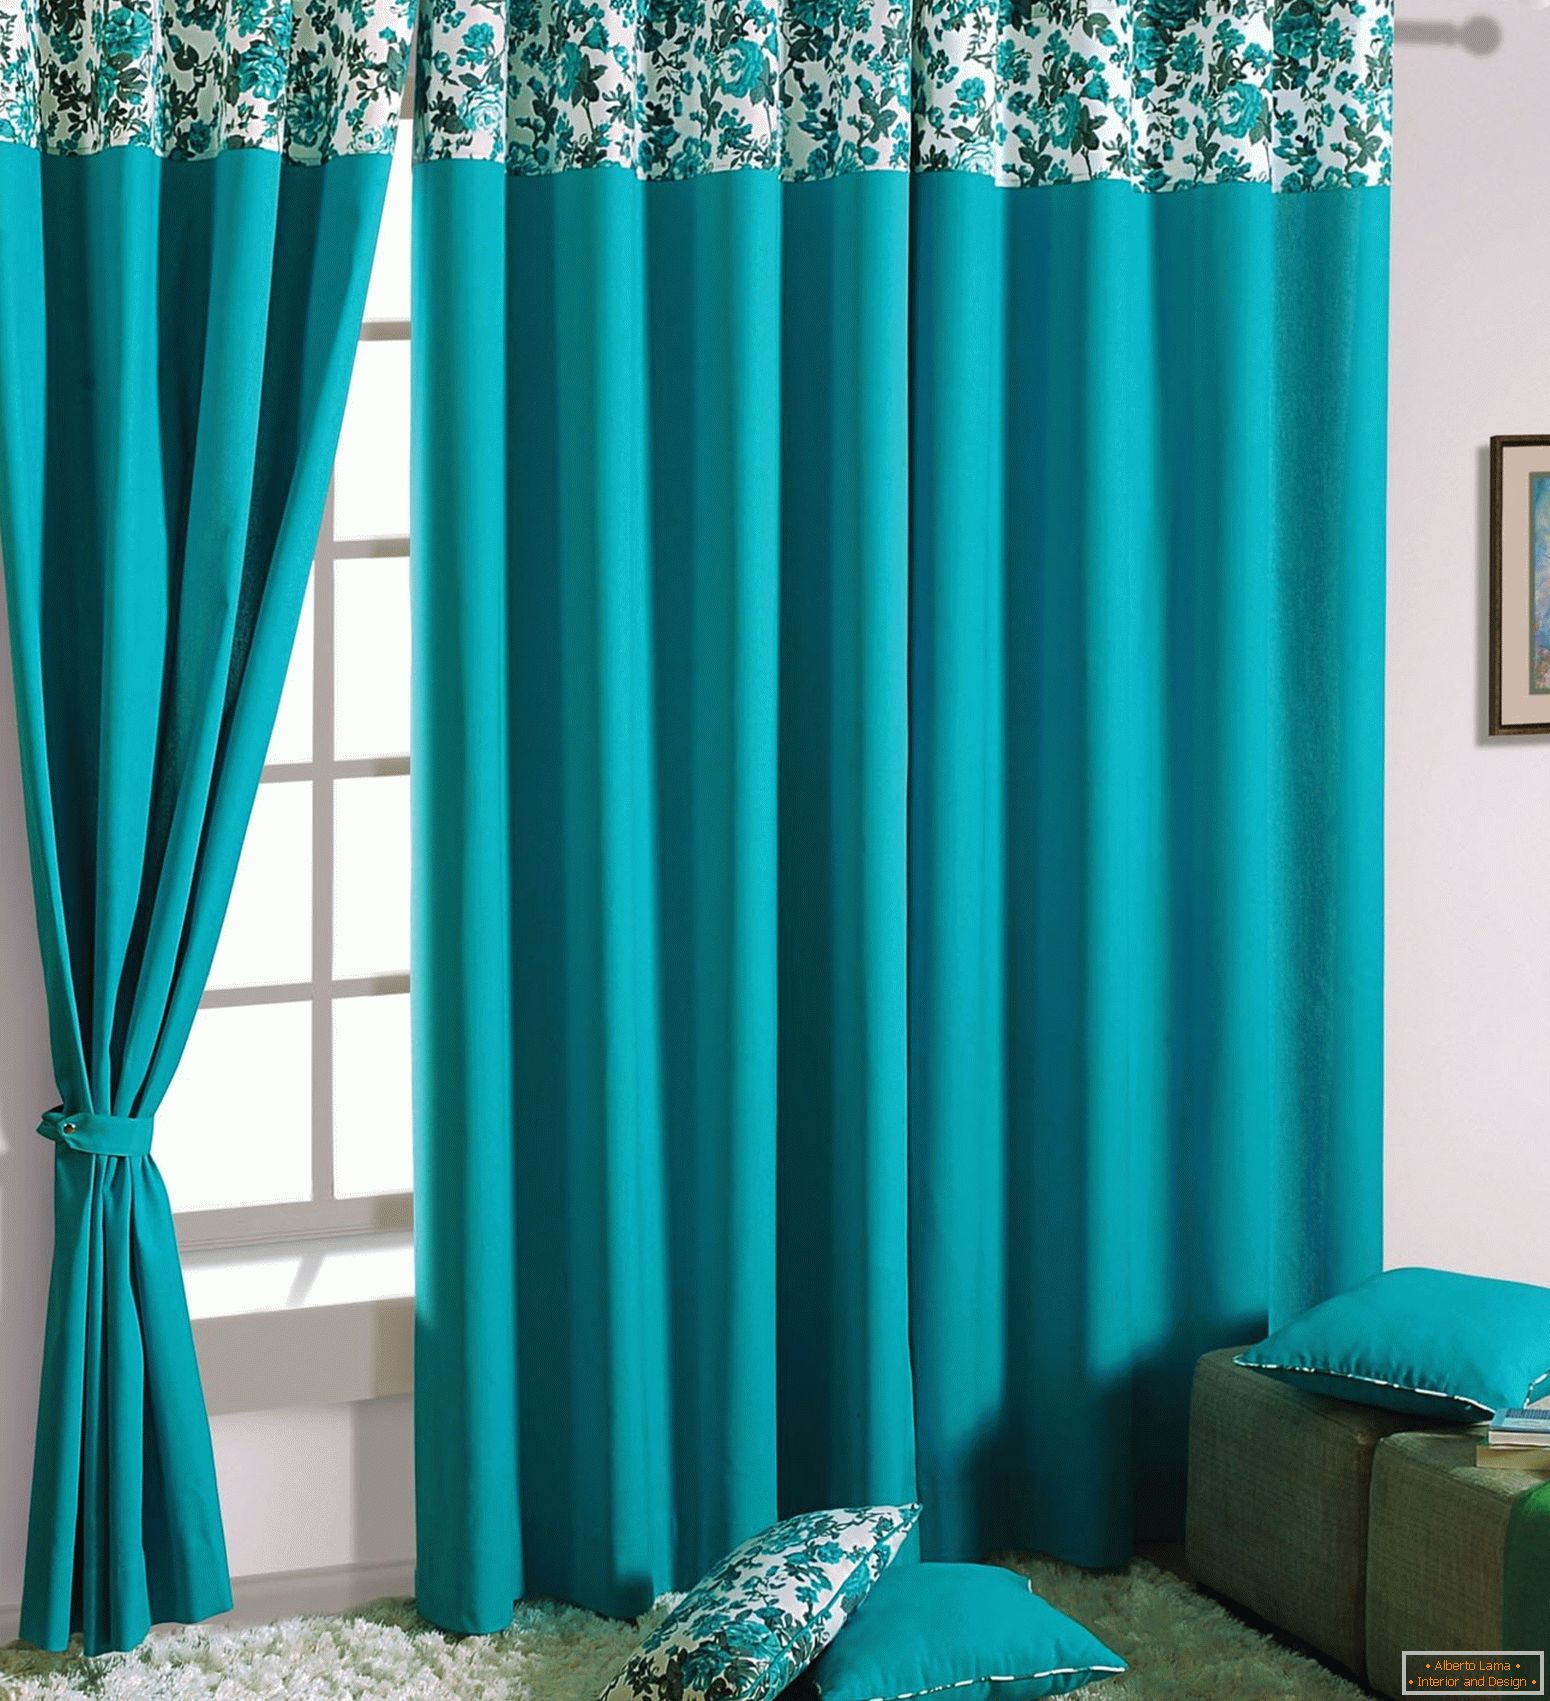 Single-color curtains with a patterned top